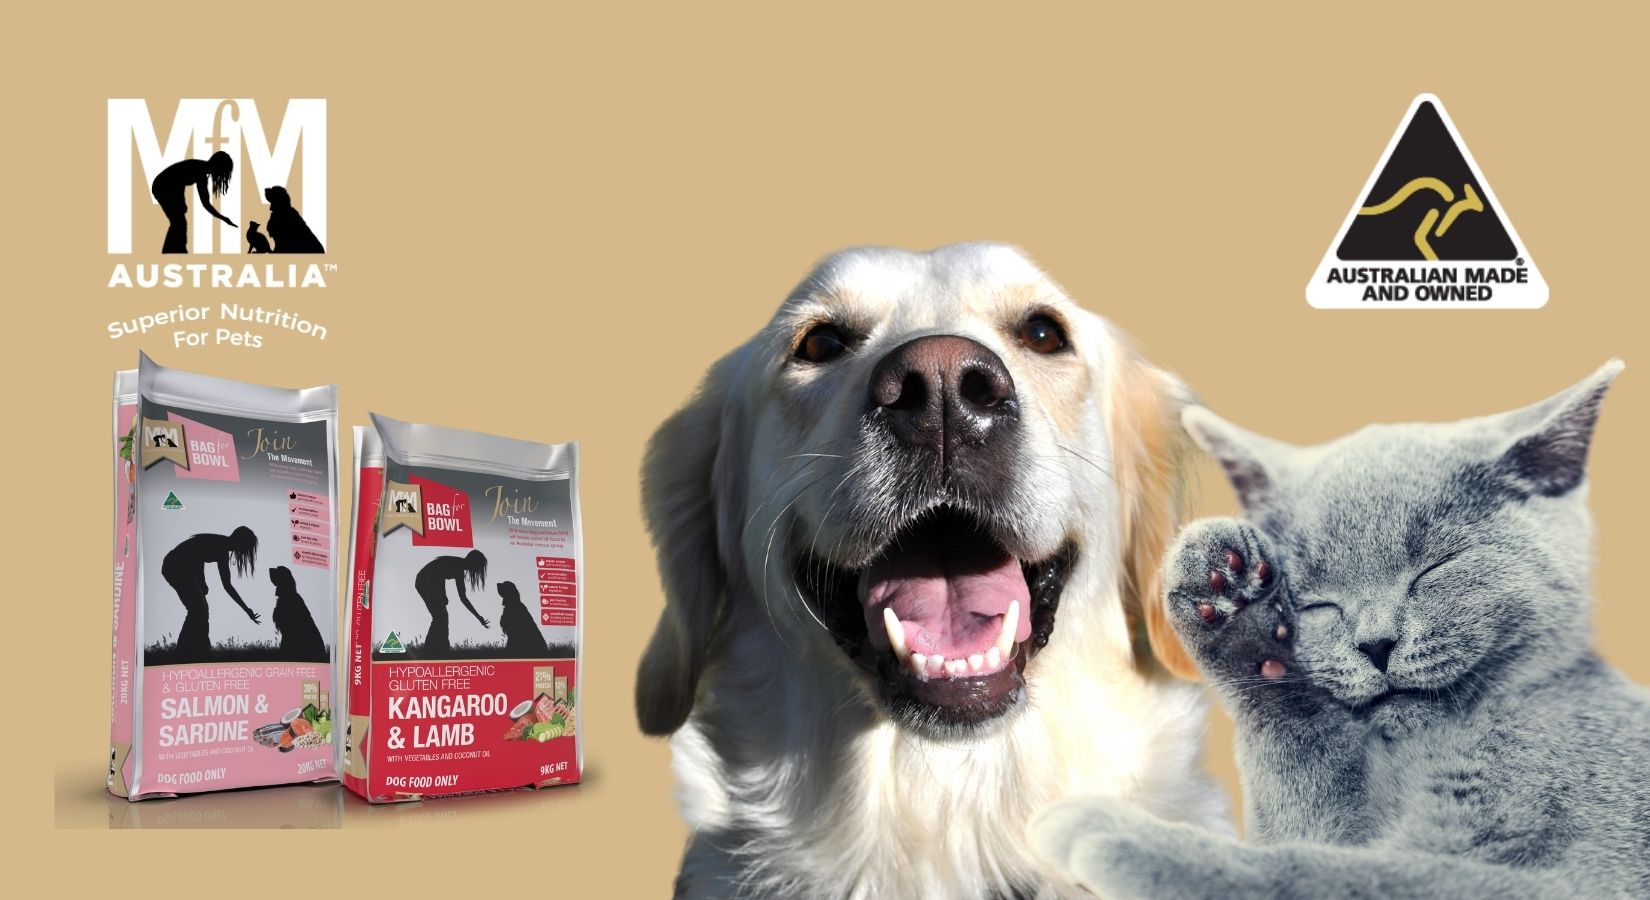 Meals for Mutts - Premium Pet Food for Dogs and Cats